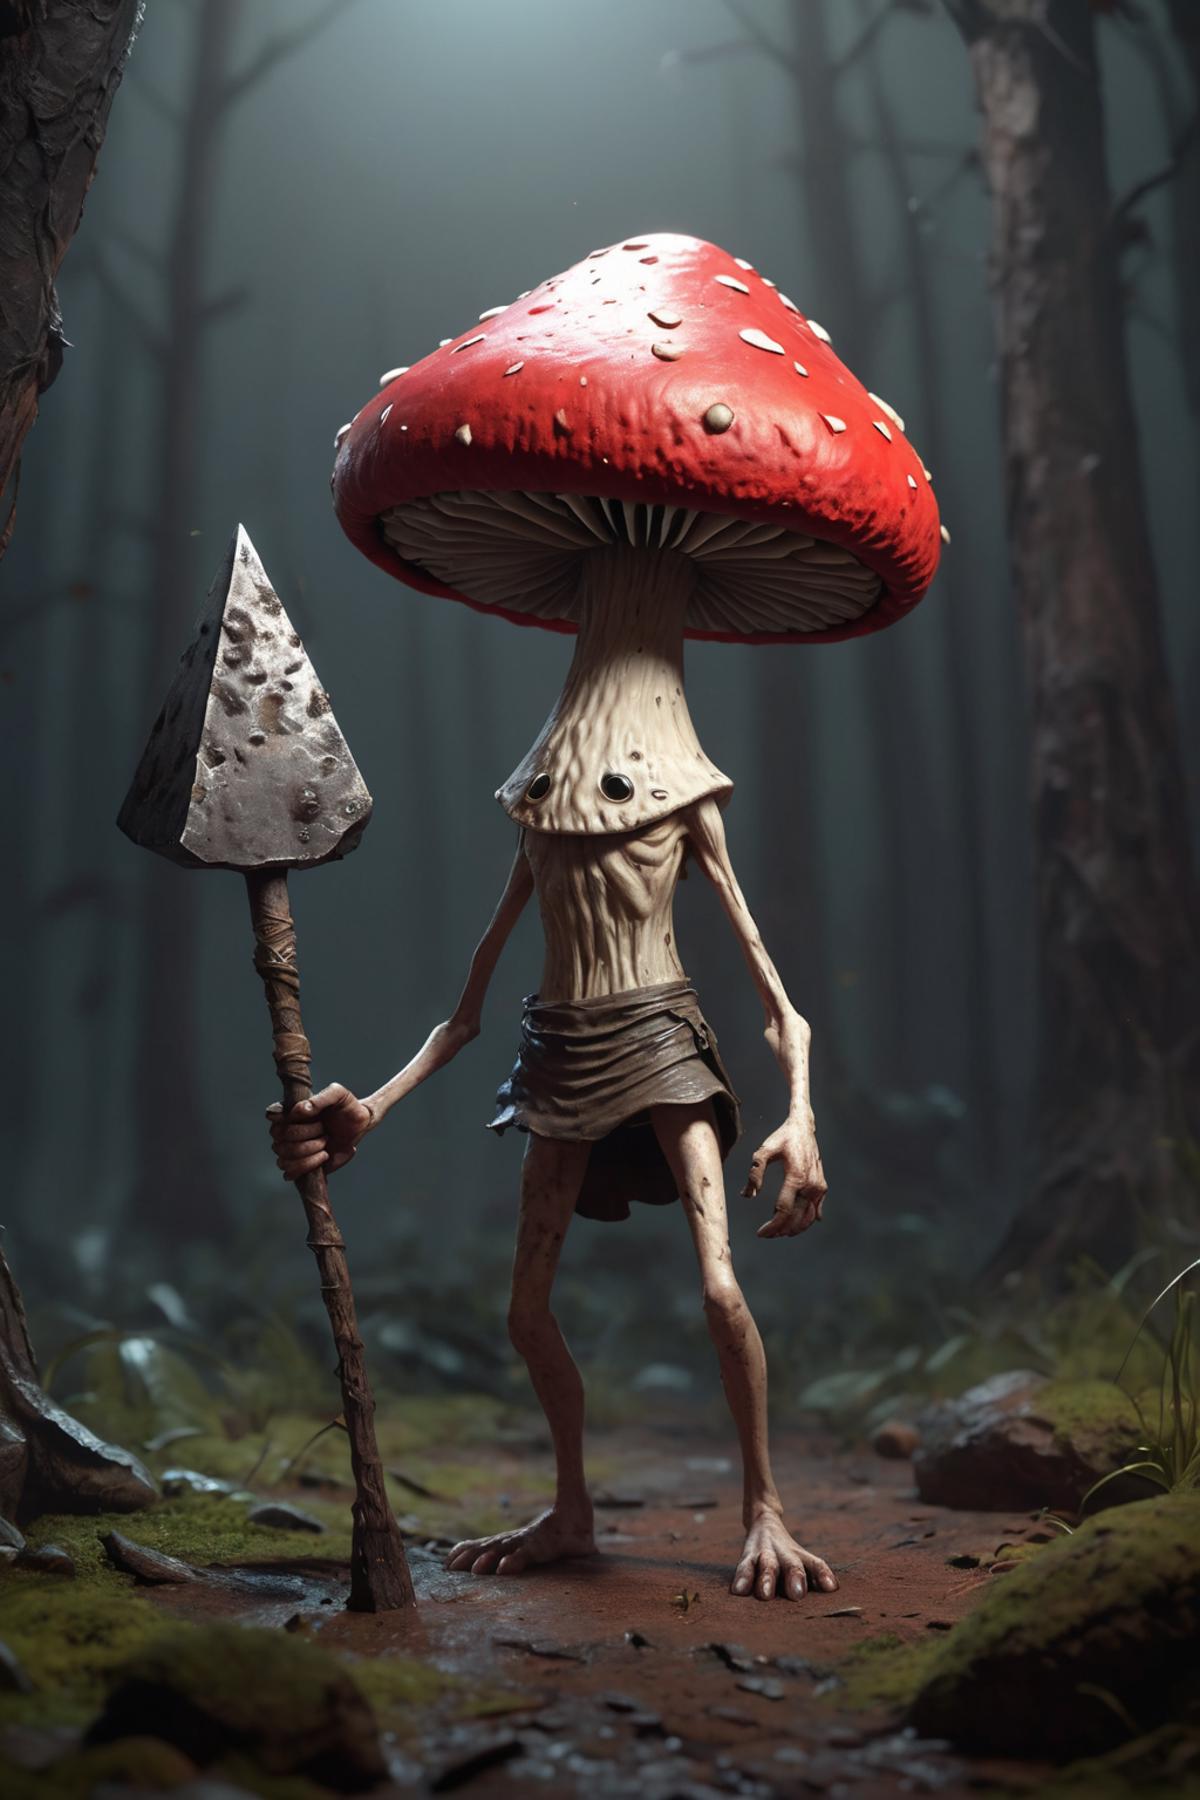 A skeletal figure holding a weapon with a mushroom hat.